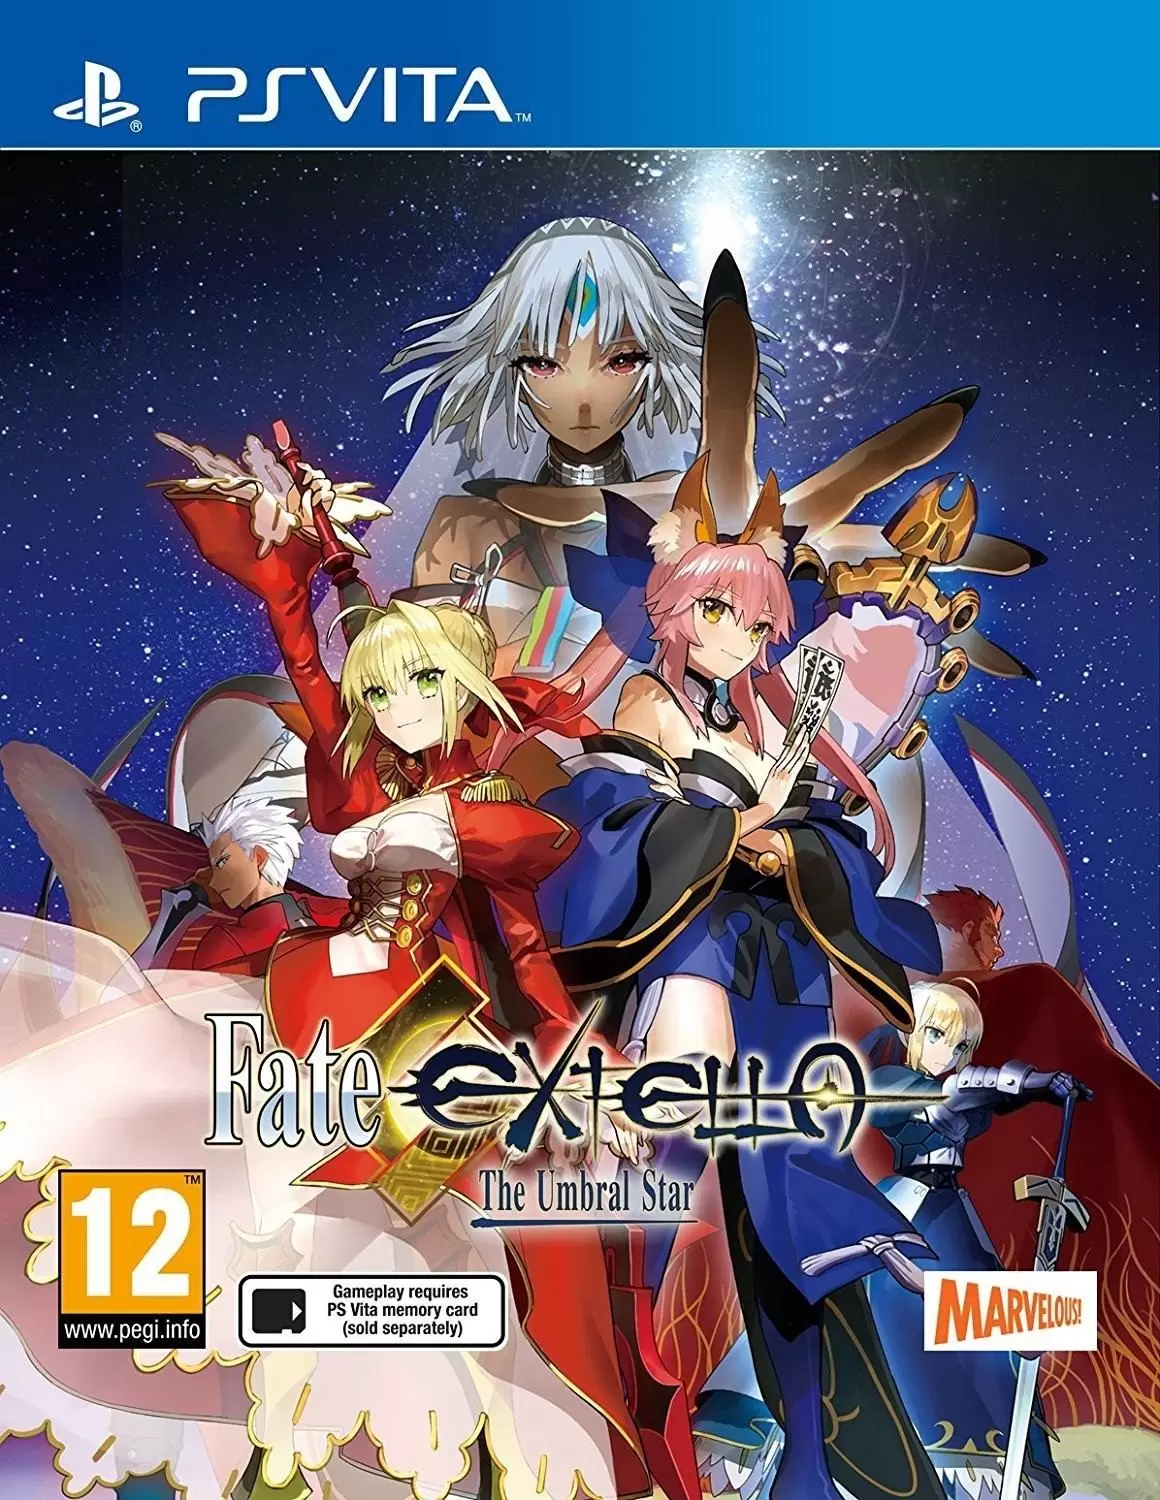 Jeux PS VITA - Fate/Extella: The Umbral Star!